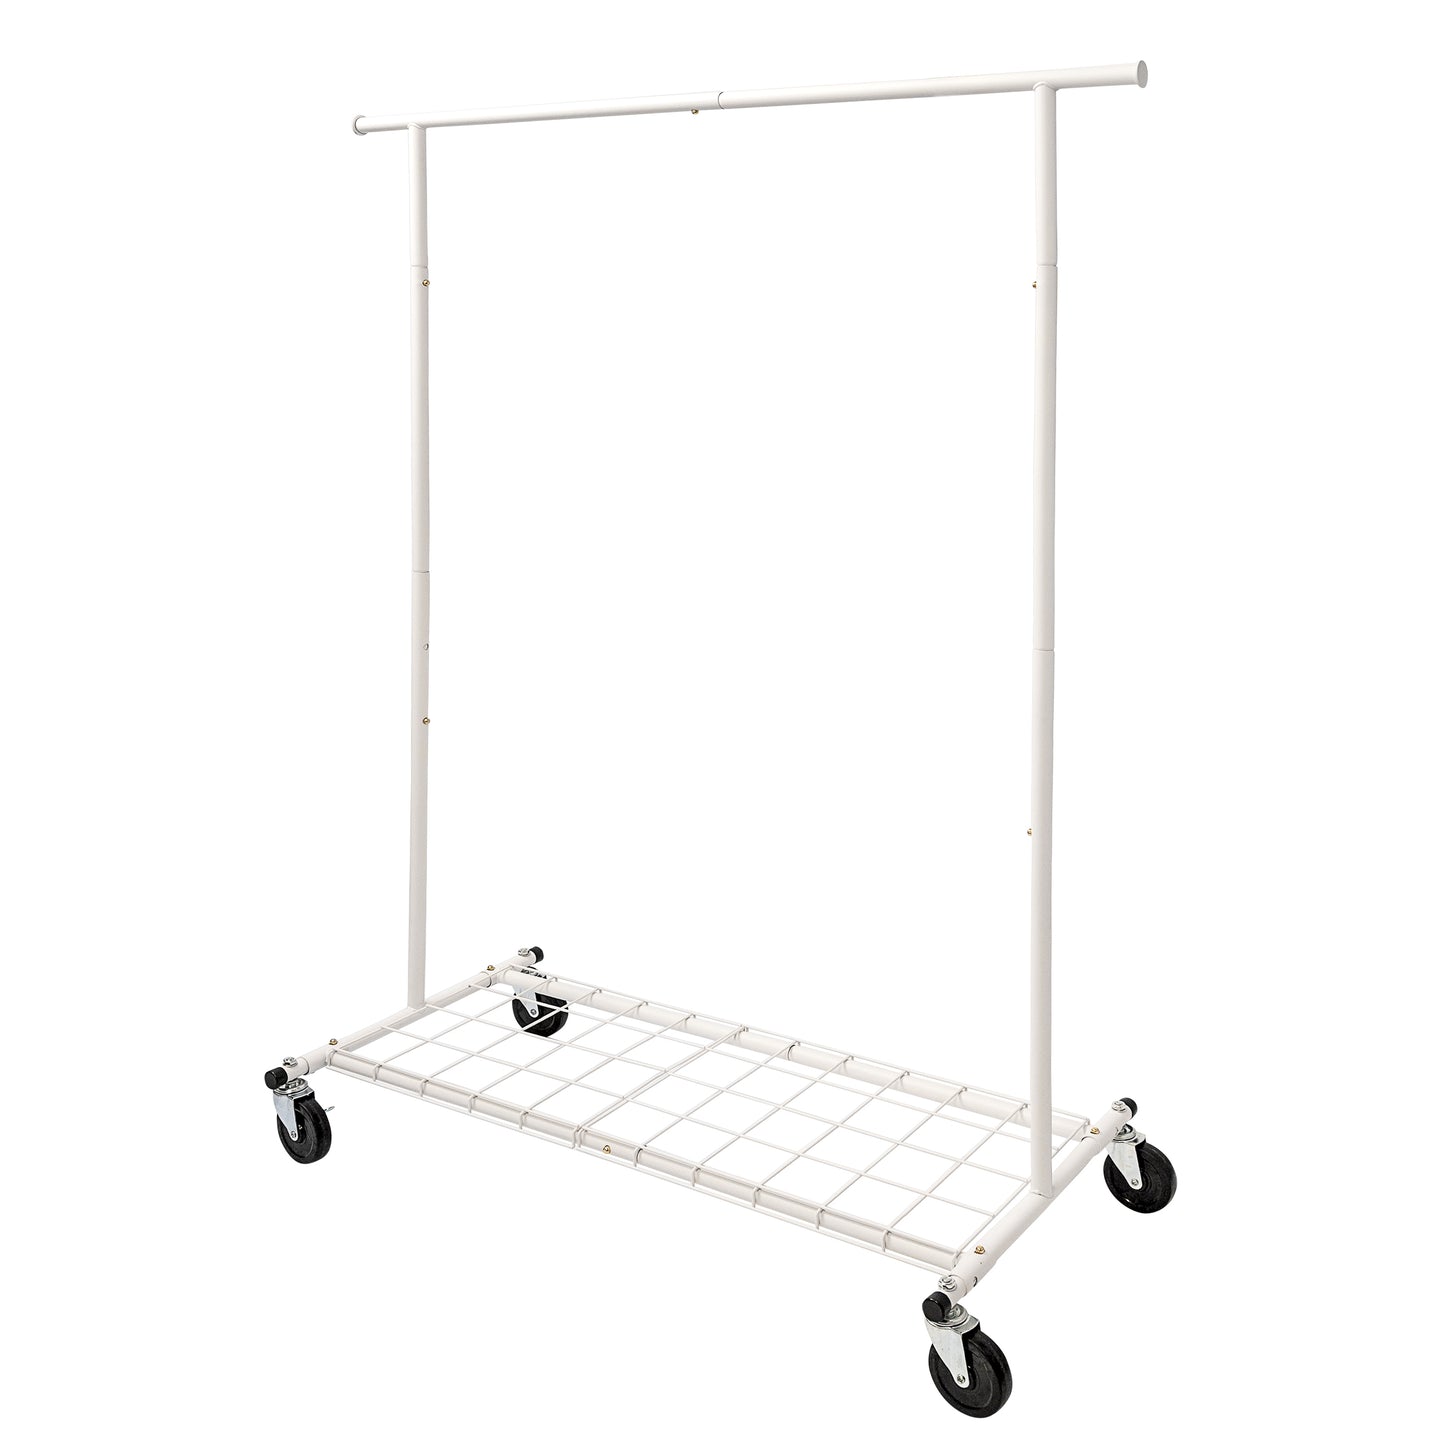 N1 Heavy Duty Matte White Metal Rolling Garment Rack With Removable Bottom Panel (100kgs Weight Capacity) Sold in 1/5